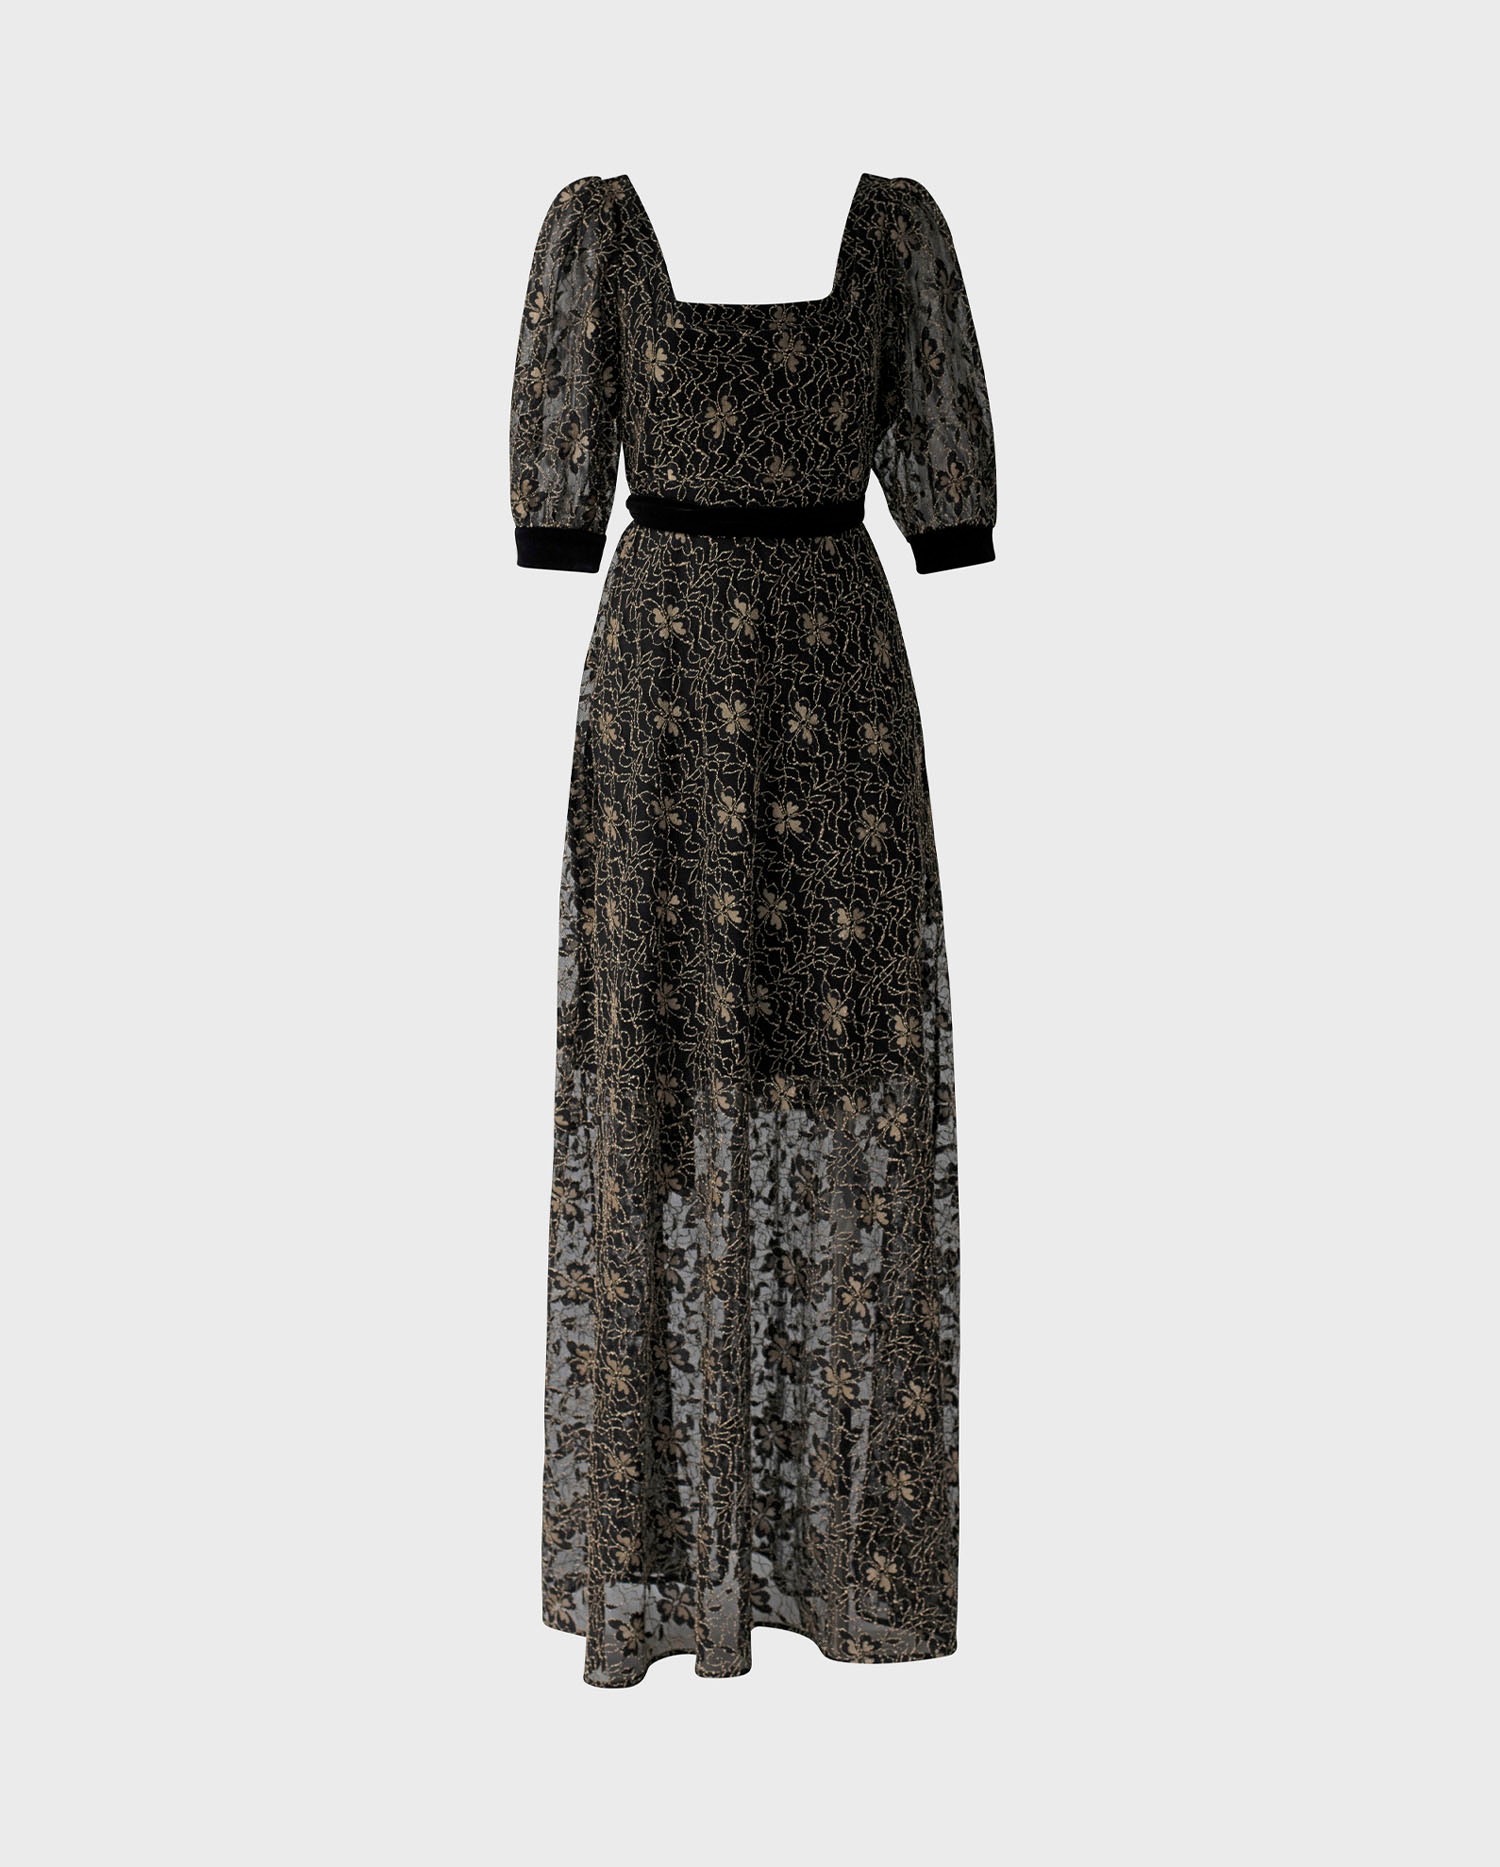 Discover the LYRIC Long black lace dress with gold floral embroidery detail from ANNE FONTAINE